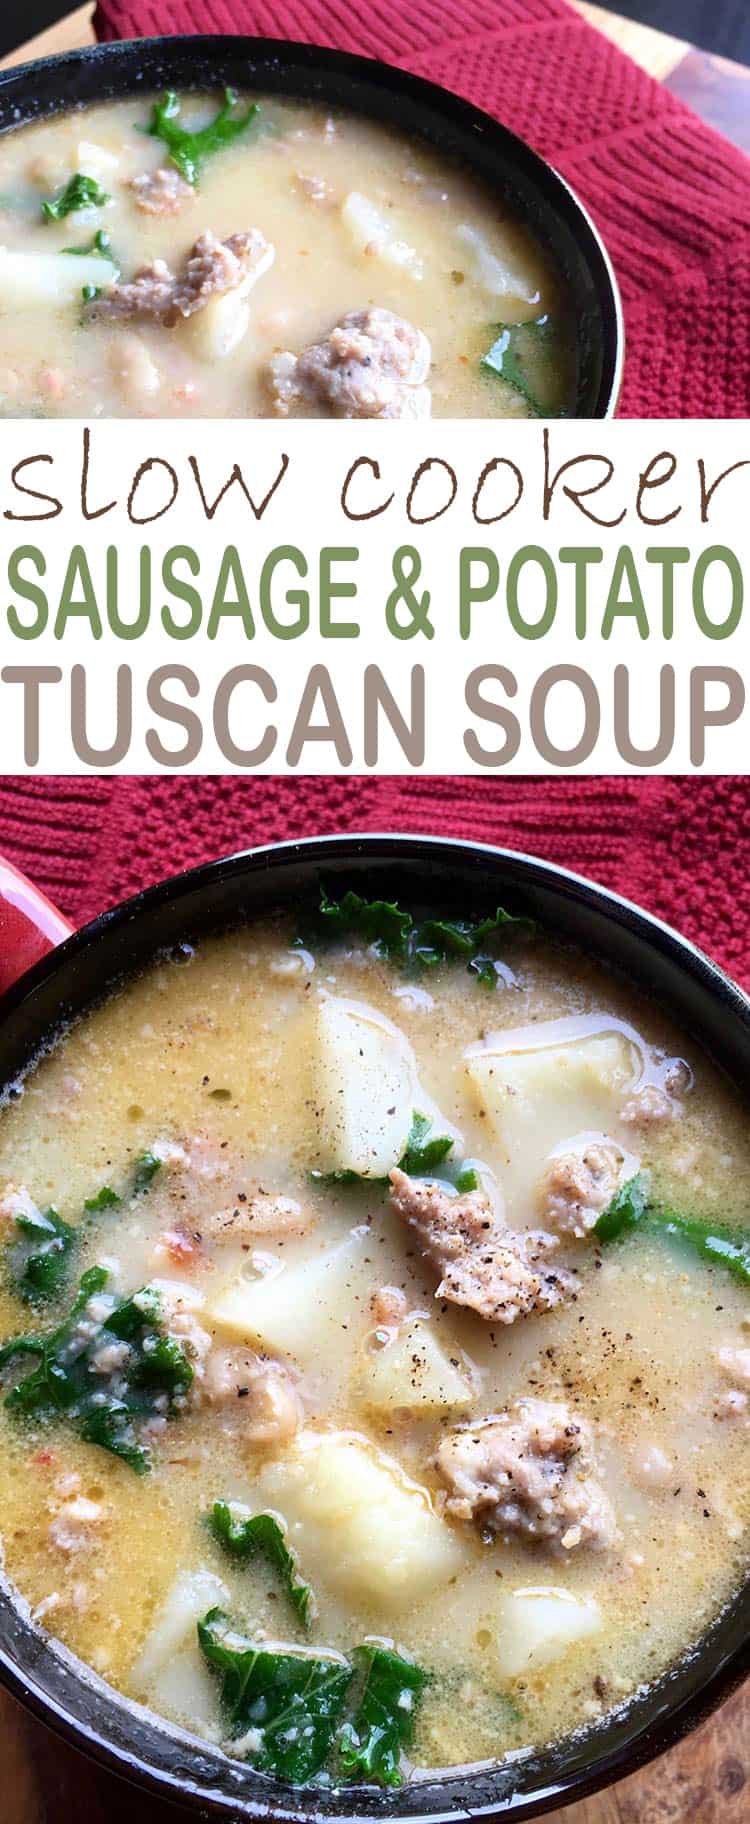 This Slow Cooker Tuscan Sausage and Potato Soup has beans and greens in it making it a comfort food recipe full of healthy ingredients. 